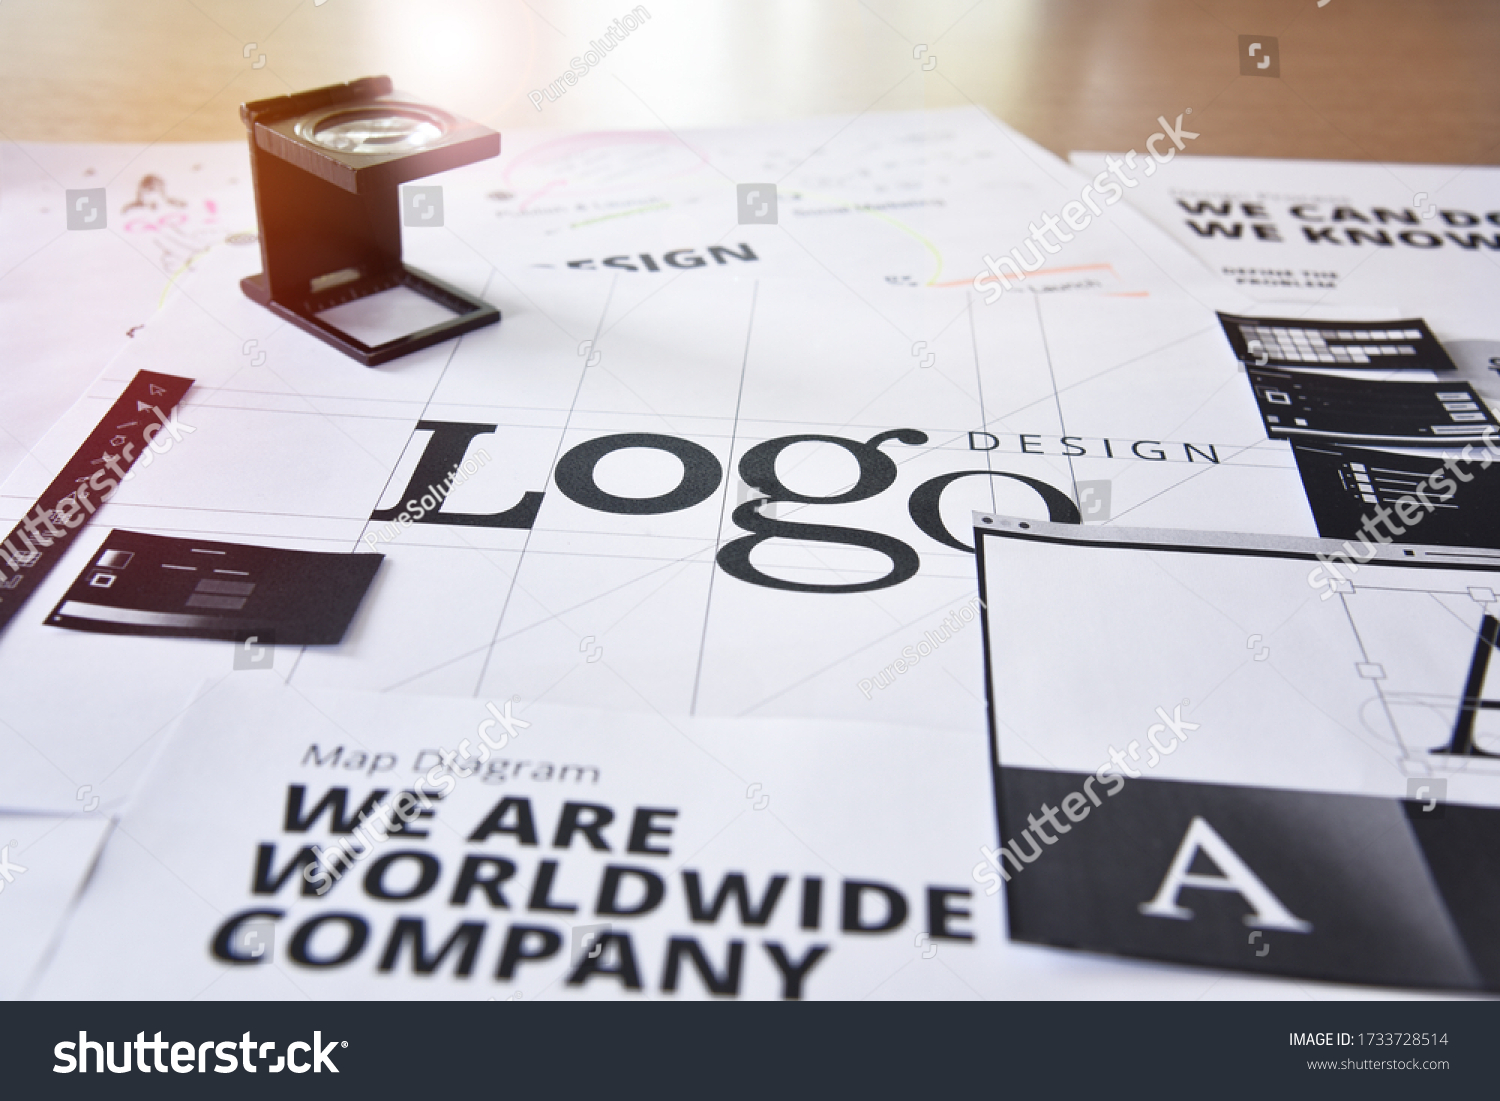 Logo design. Creative concept for website and mobile banner, internet marketing, social media and networking, branding, marketing material, presentation template. #1733728514